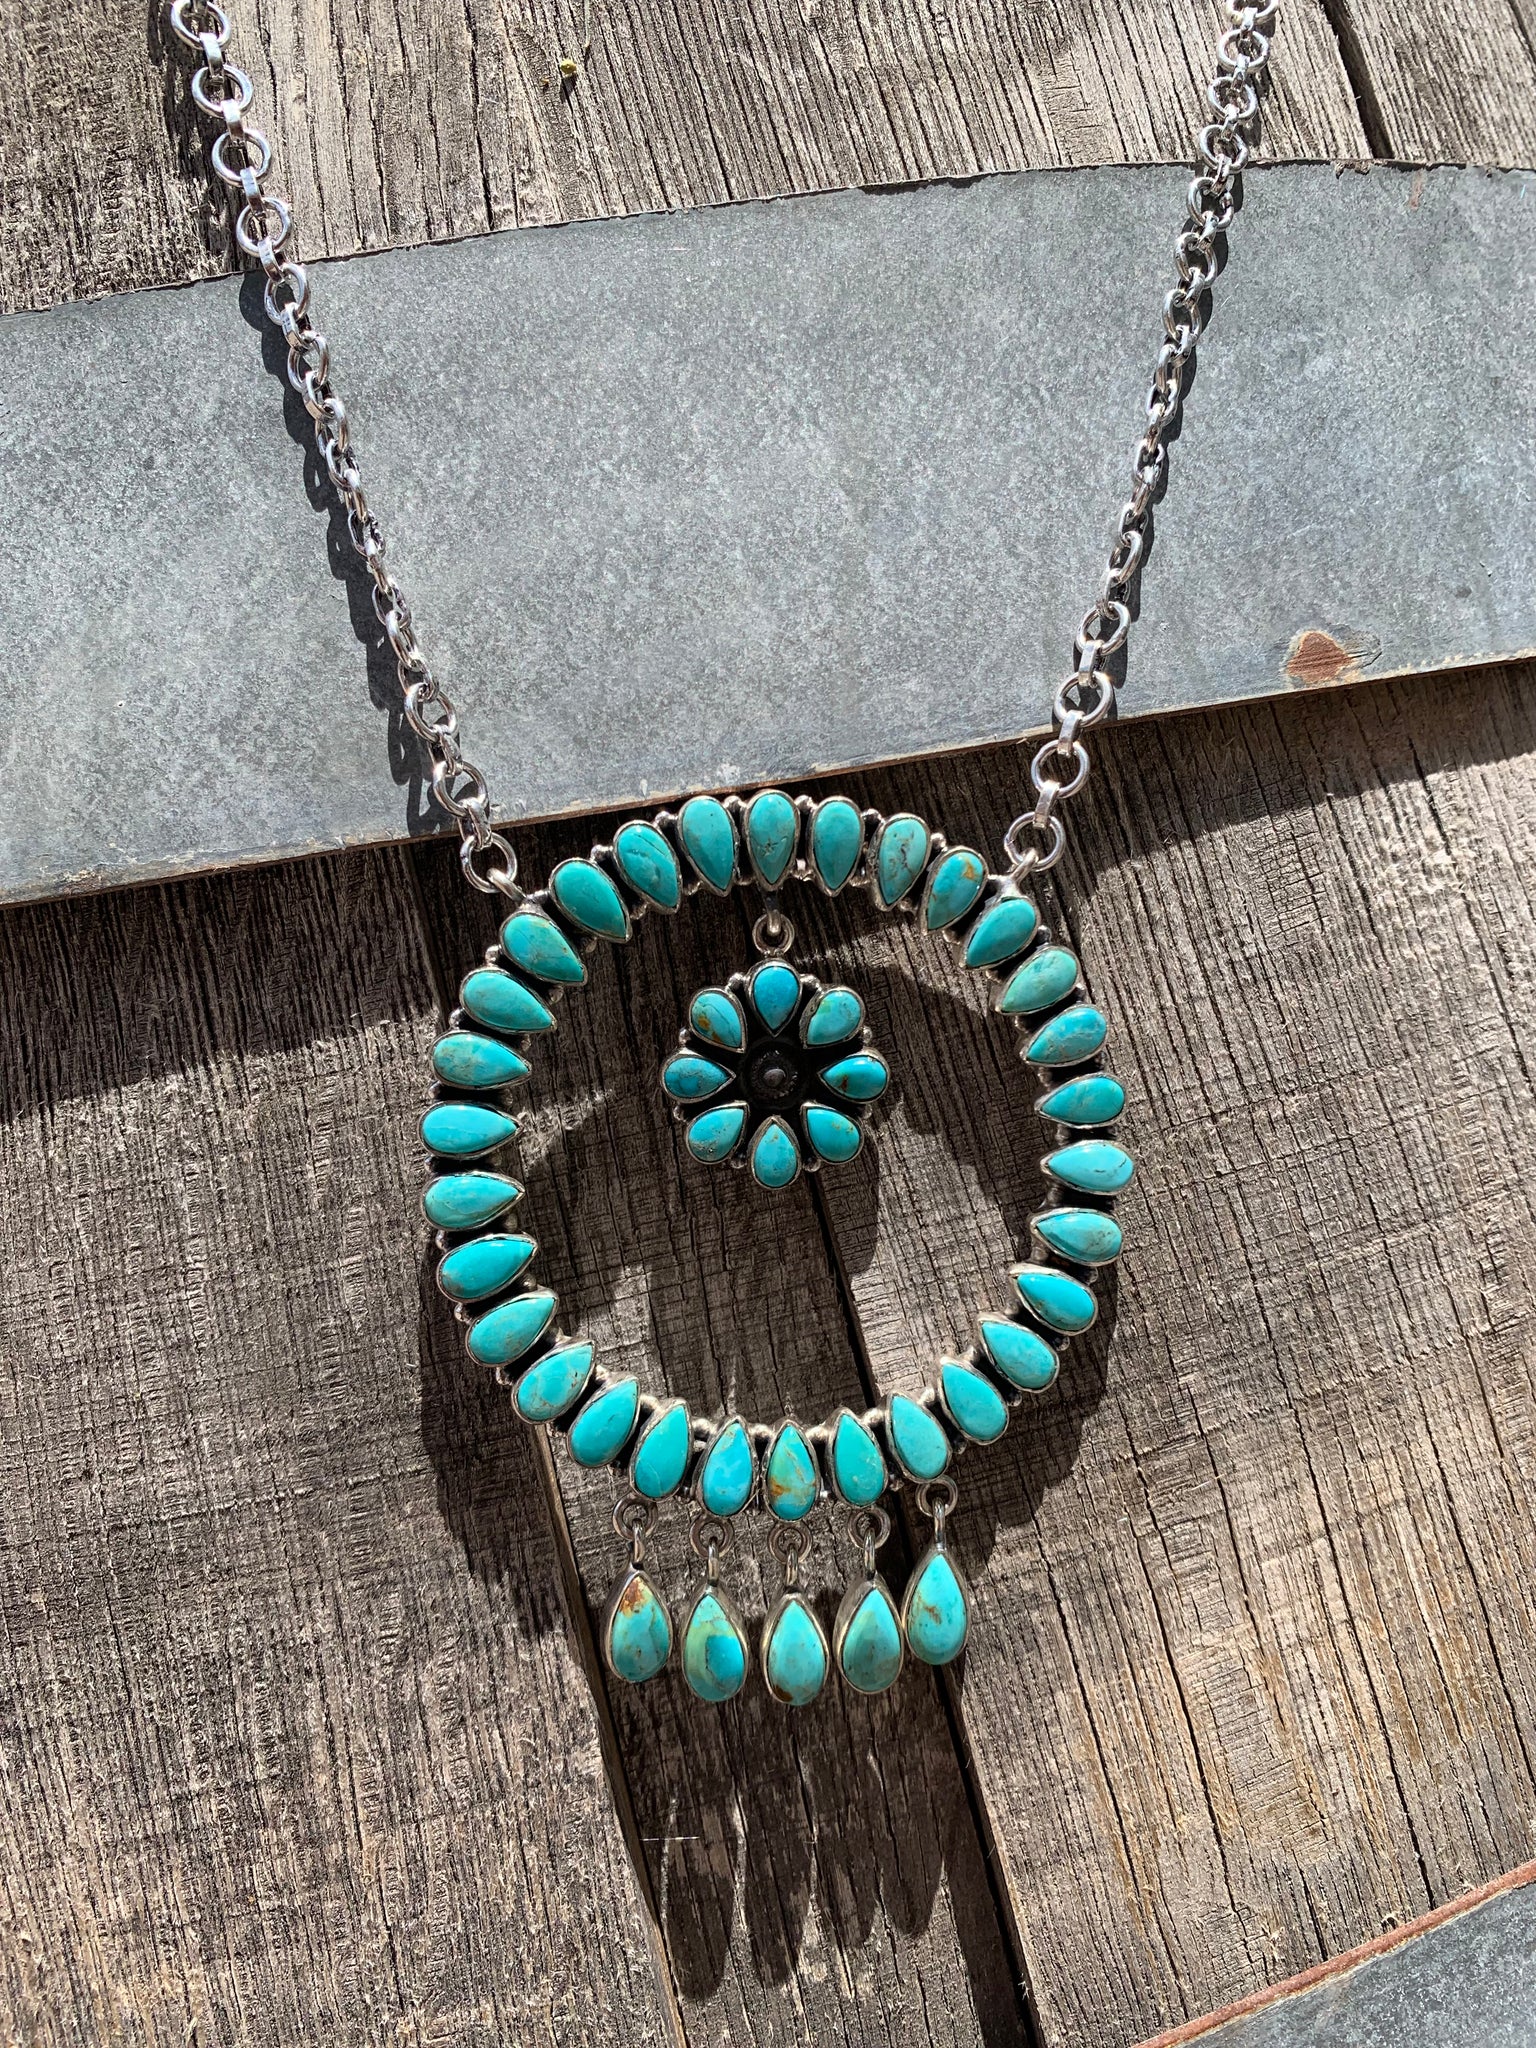 Statement Turquoise necklace